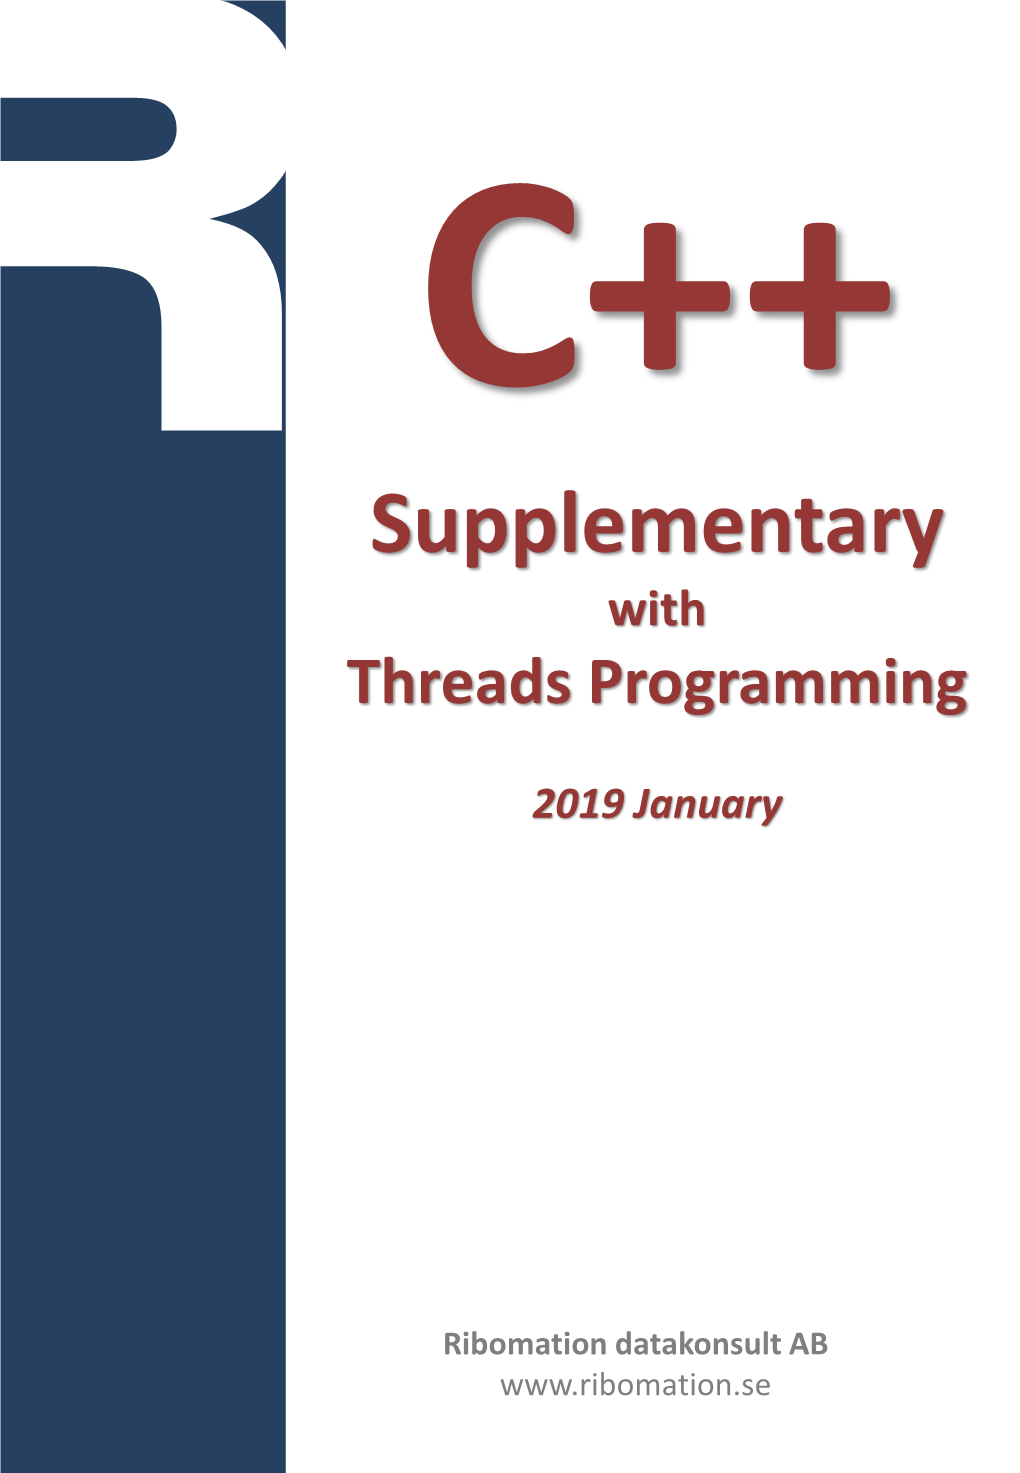 Supplementary with Threads Programming